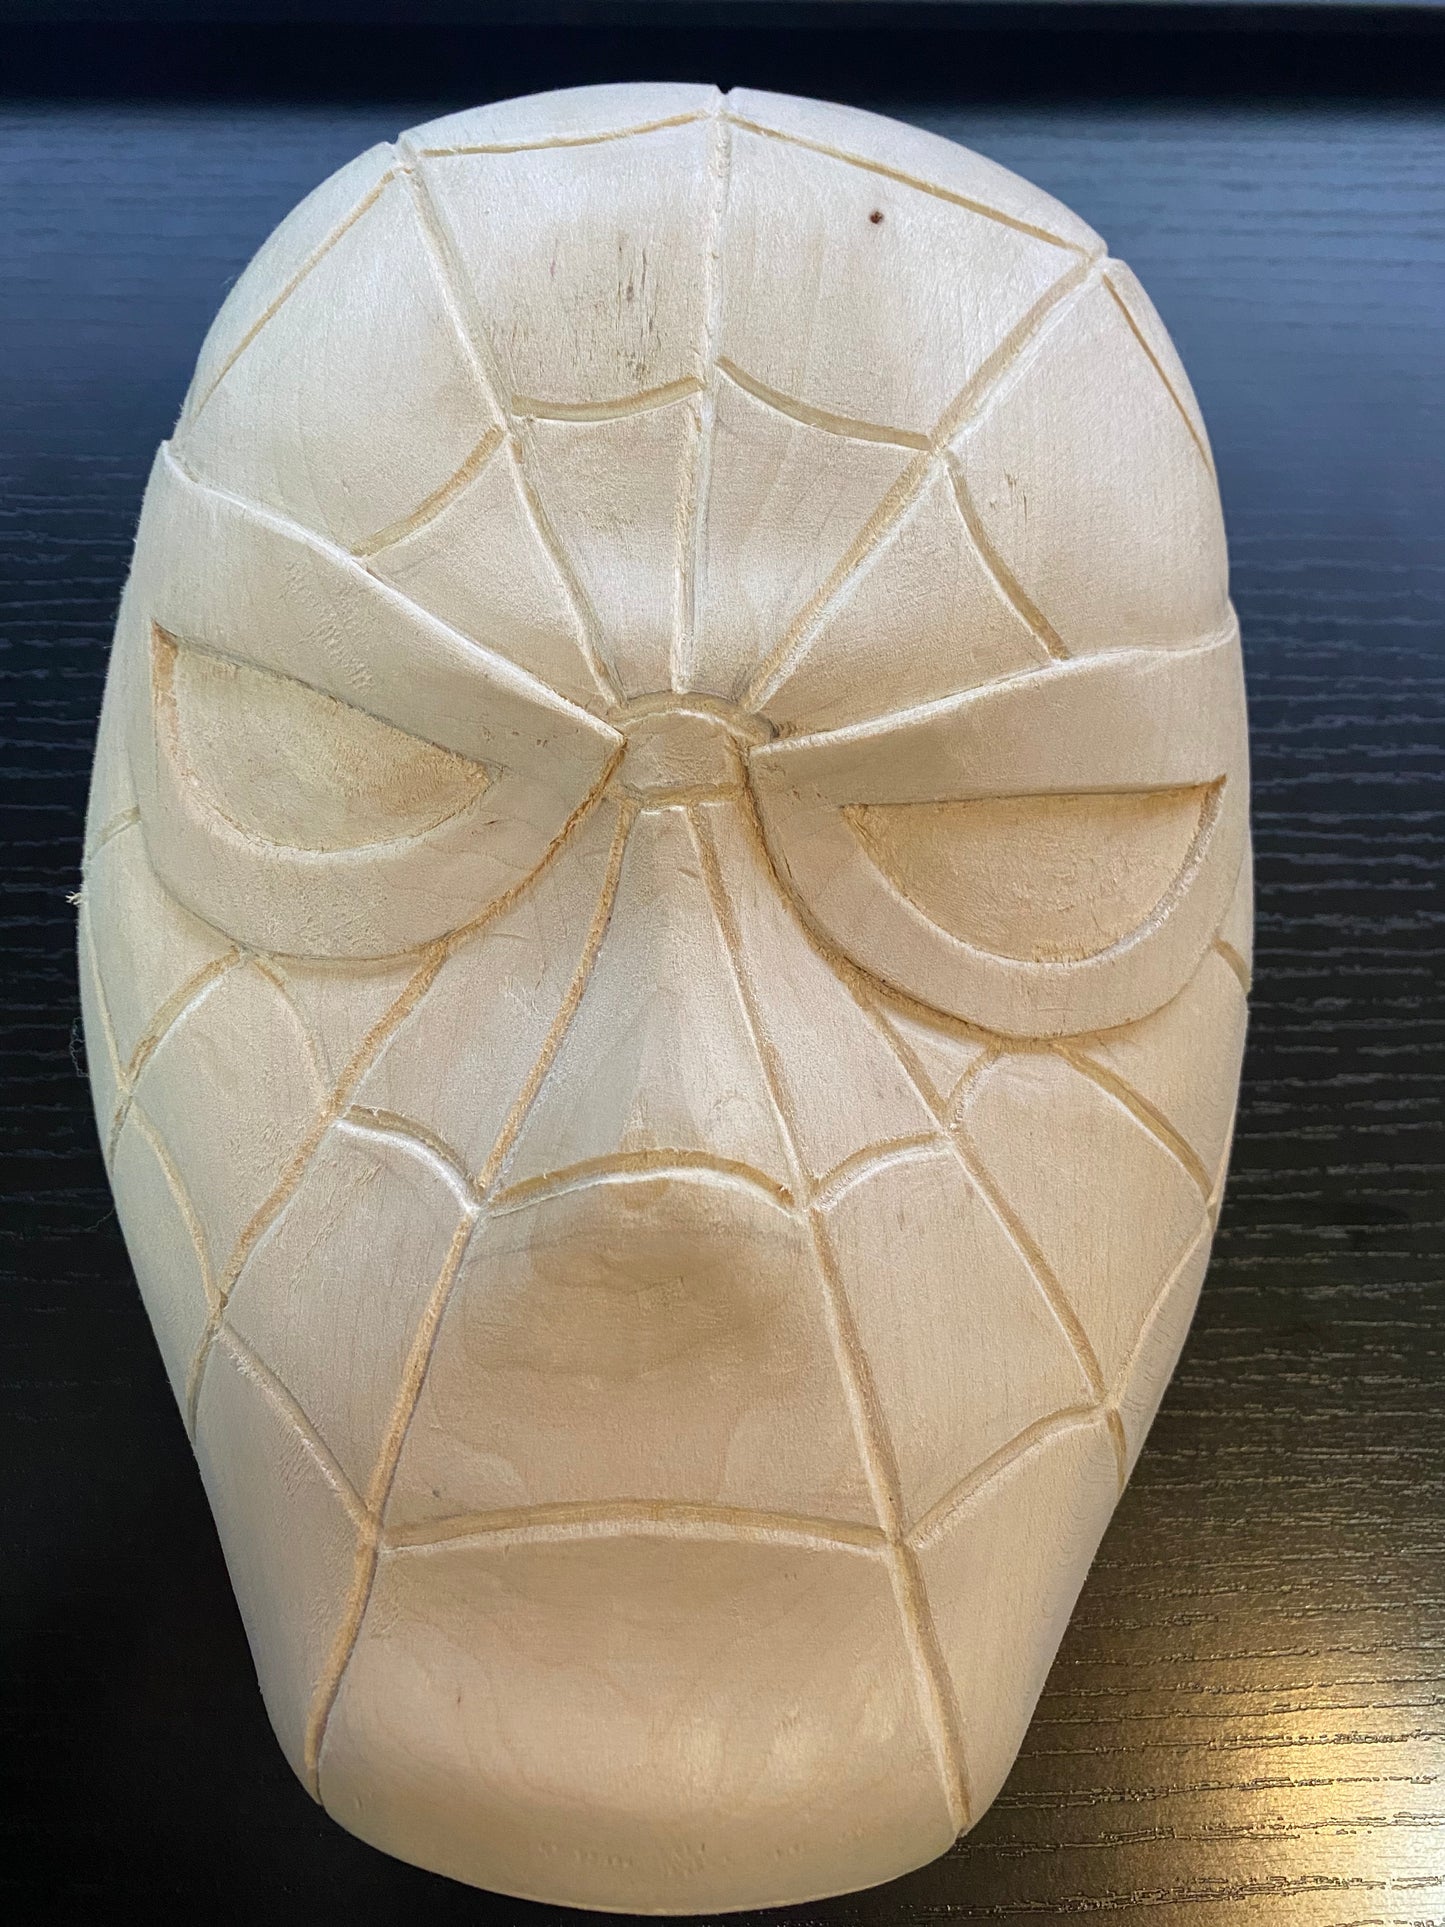 Hand-Carved Spider-Man Wall Bust